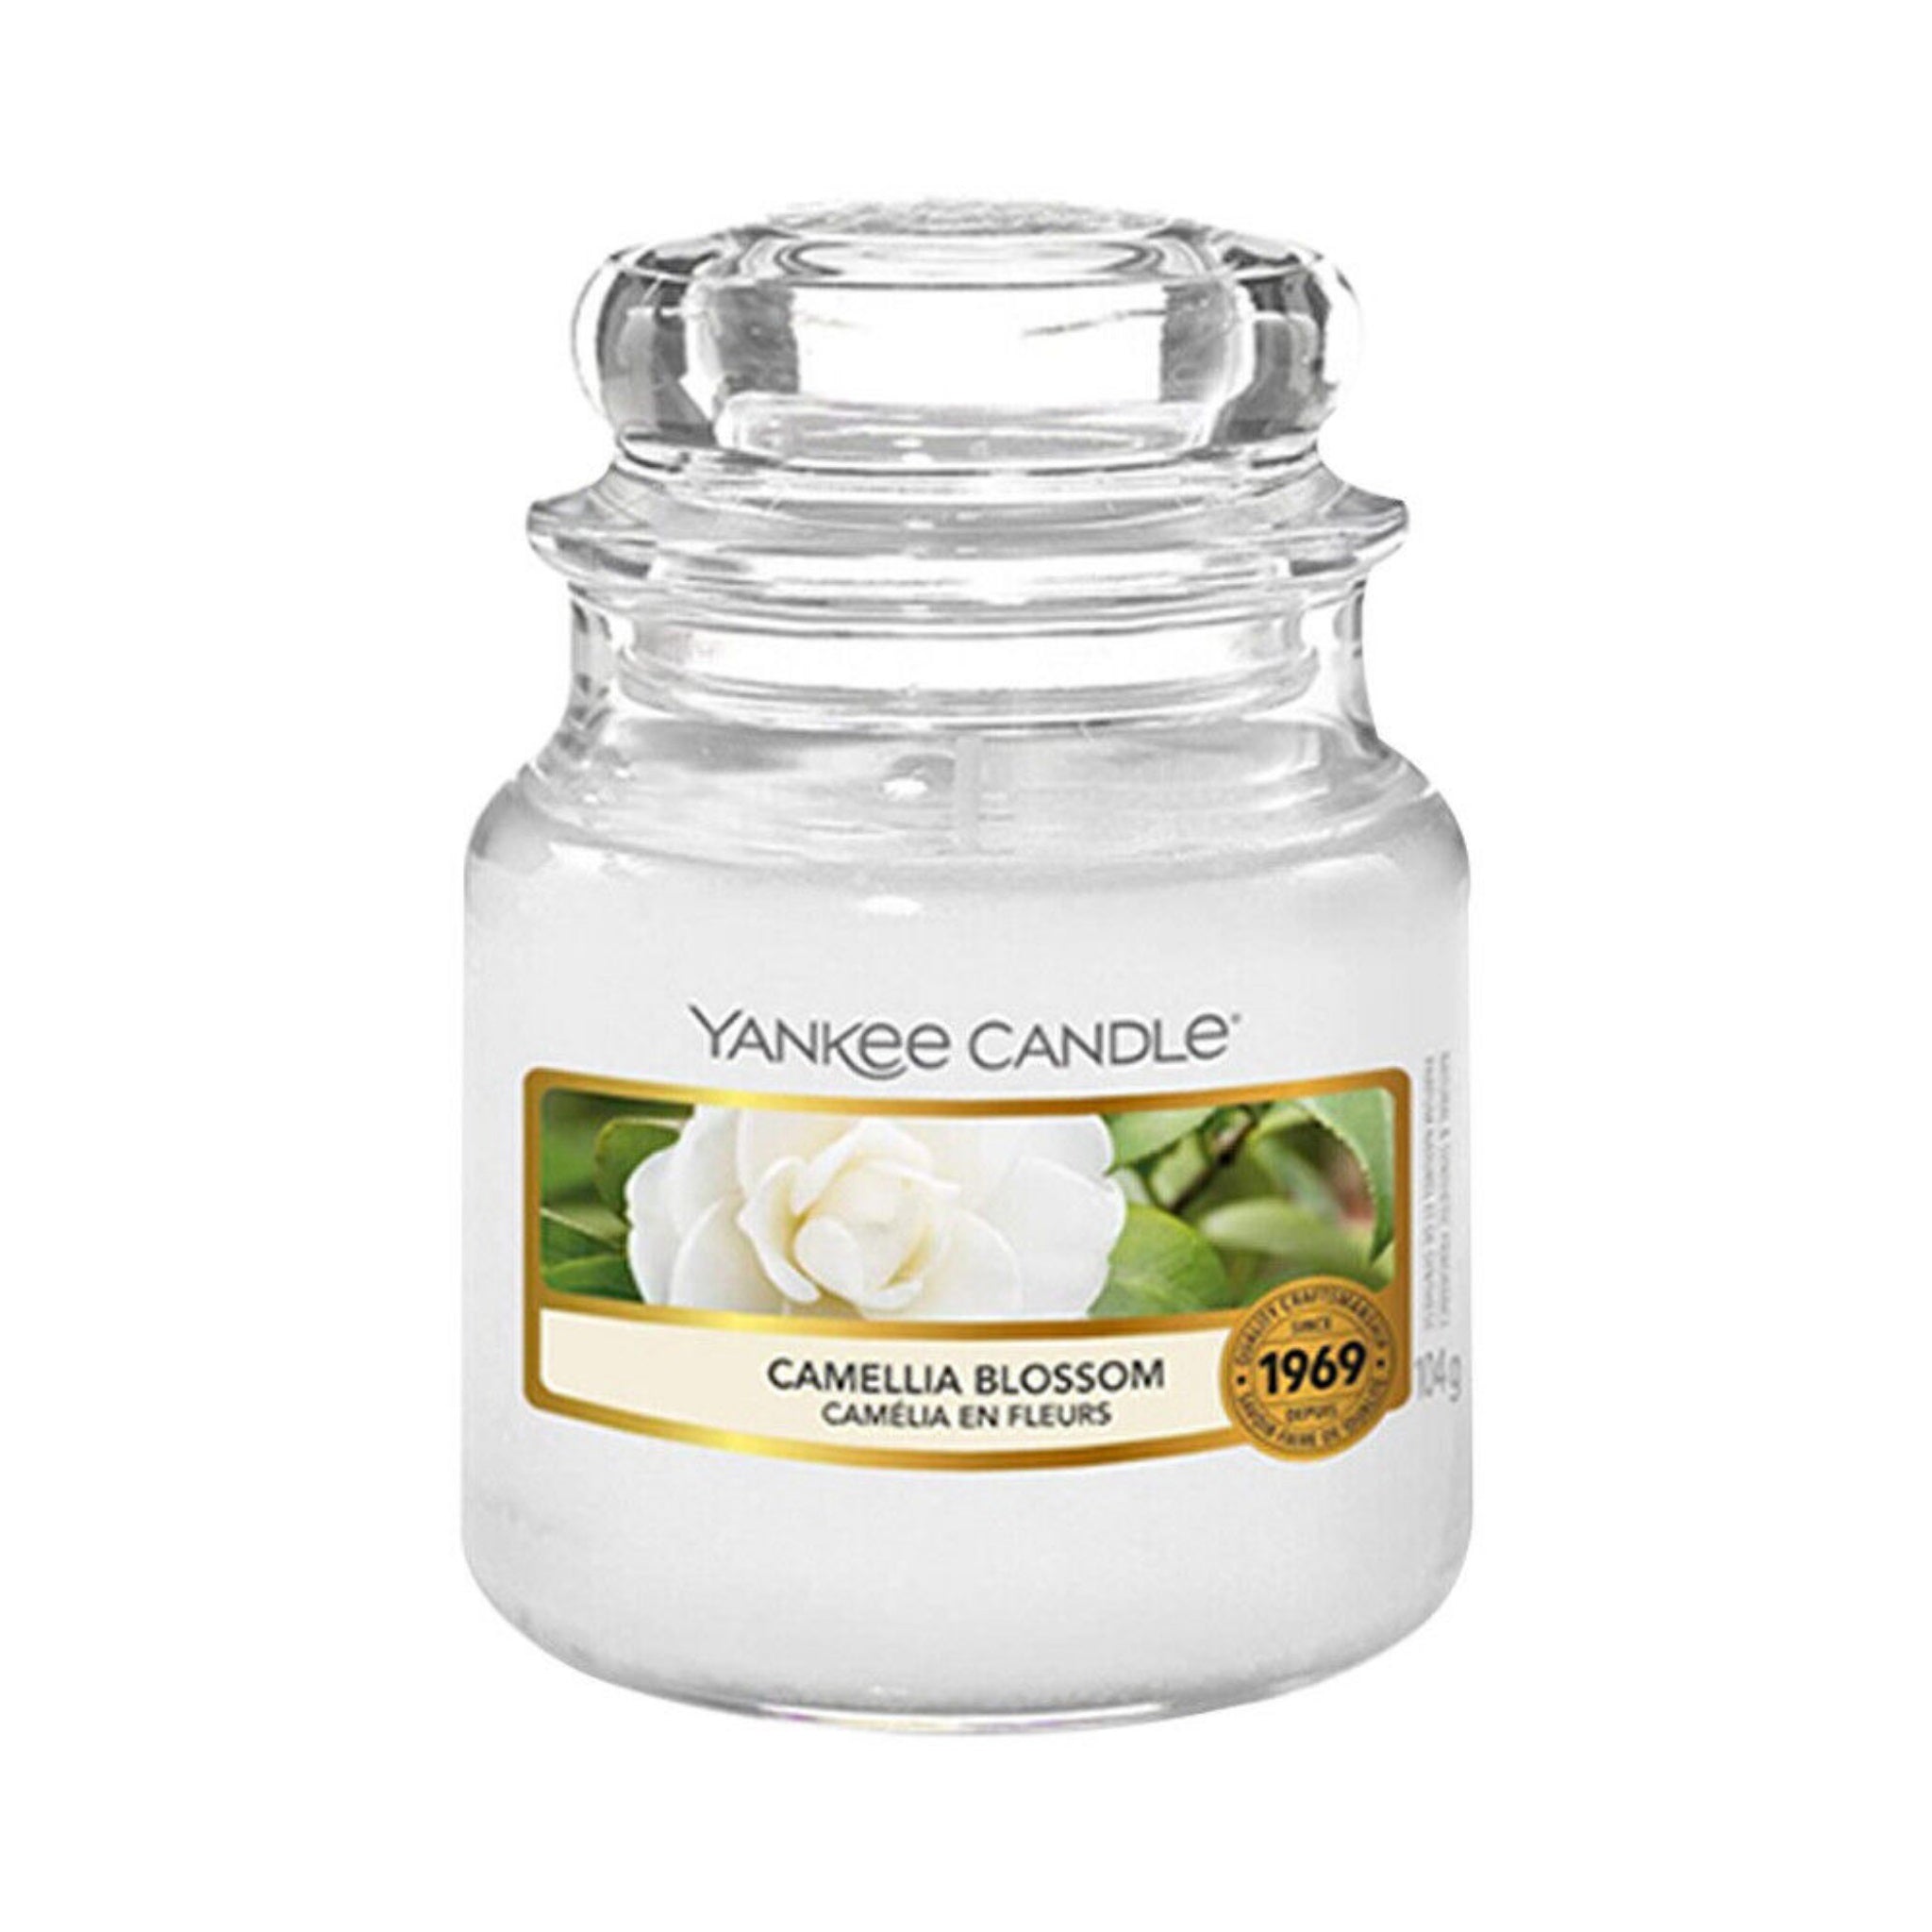 Beclen Harp Large Scented Yankee Wax Melt Small Candle In Glass Jar 104g Assorted Fragrances Home Inspiration